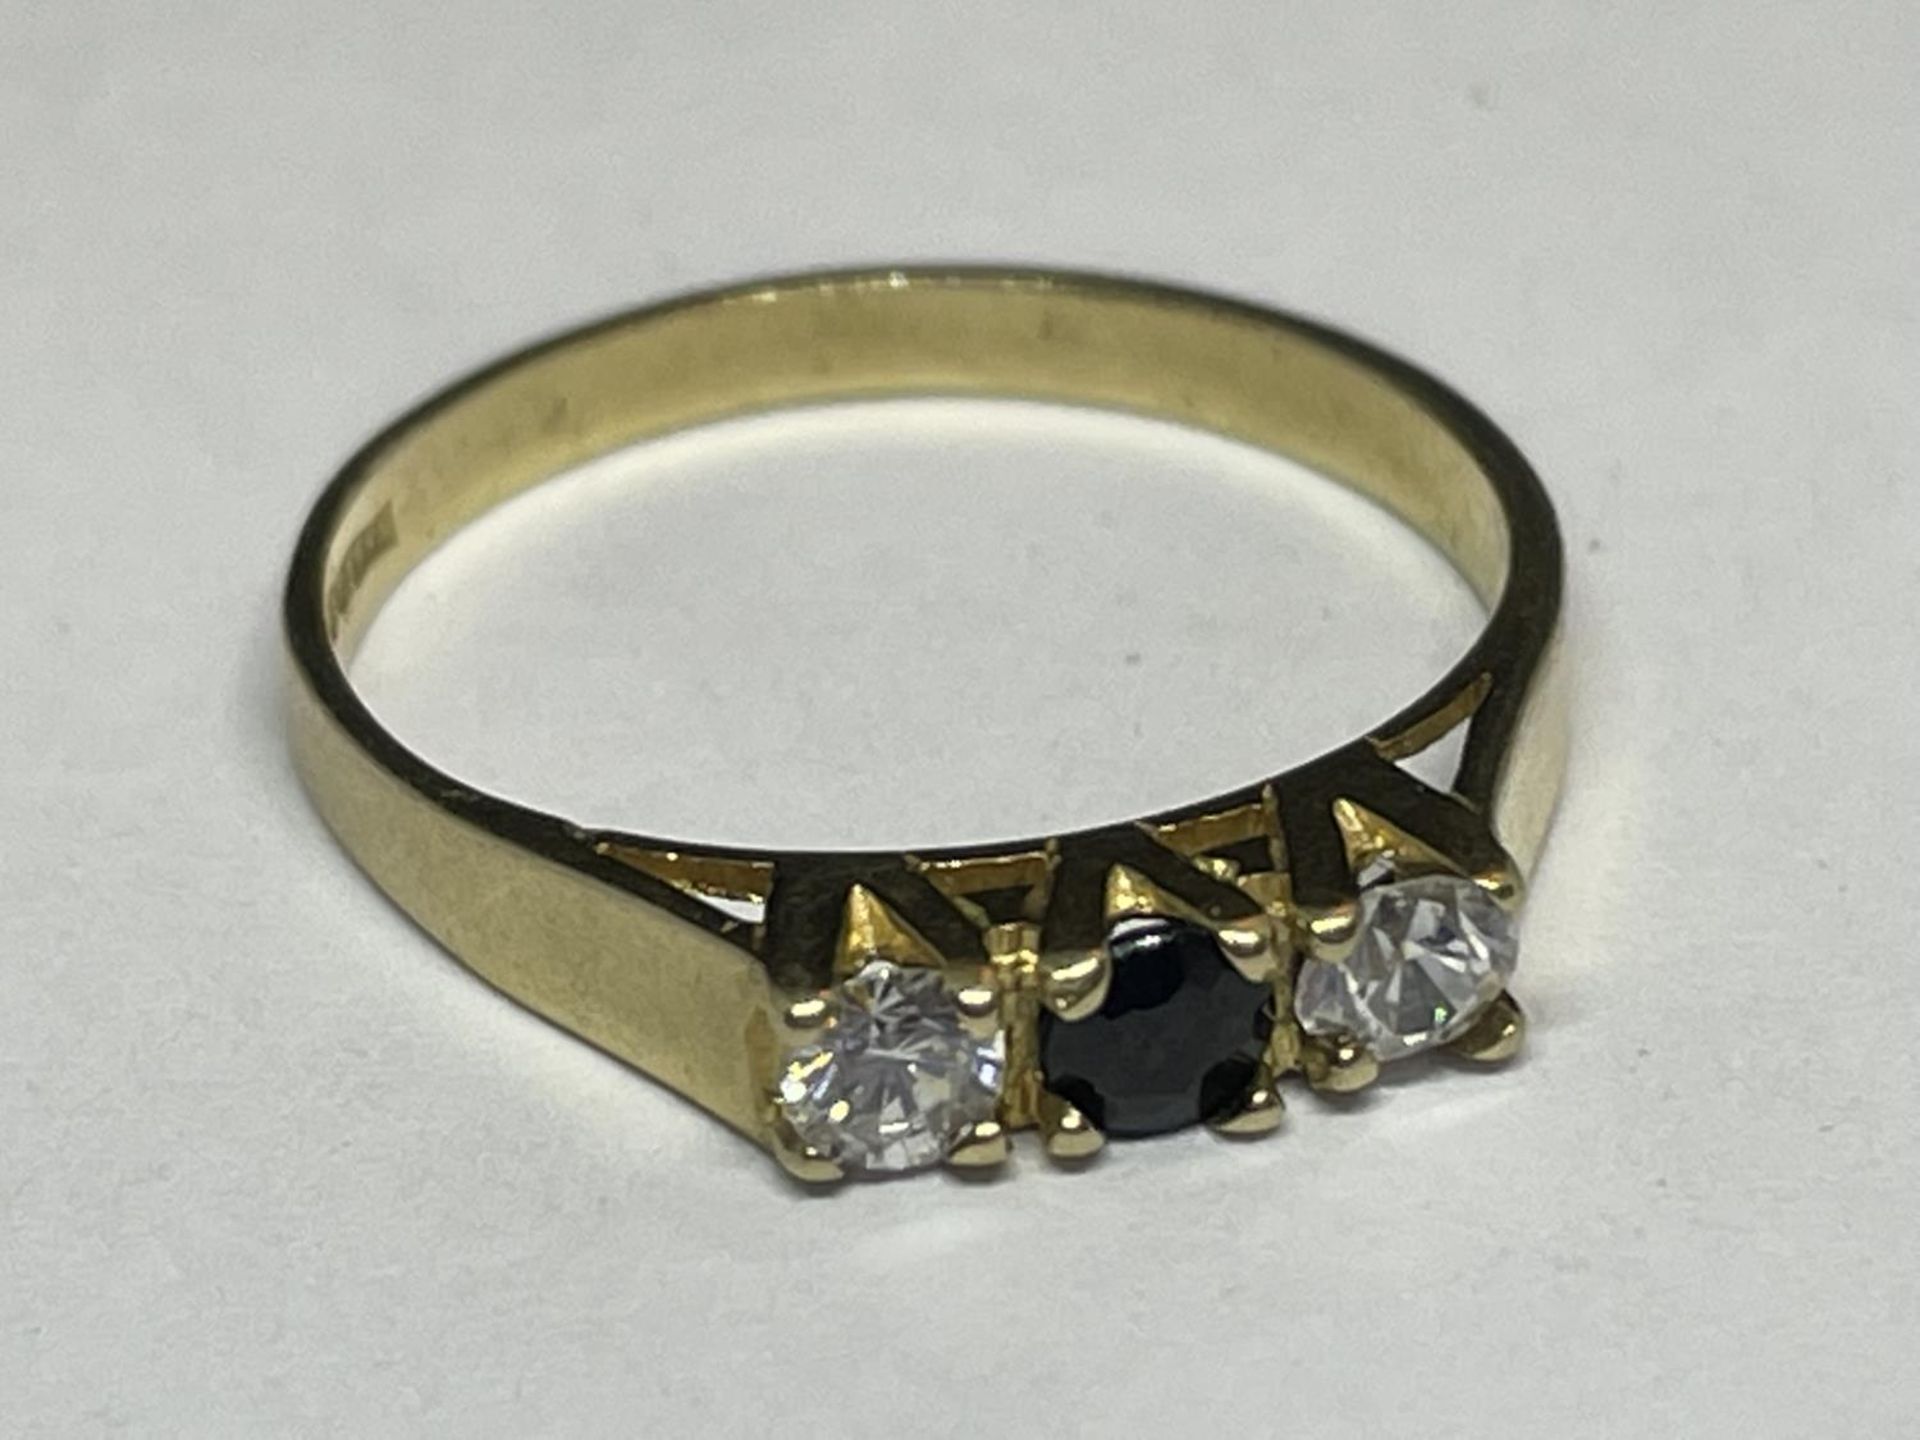 A 9 CARAT GOLD RING WITH THREE IN LINE STONES TO INCLUDE A CENTRE SAPPHIRE AND TWO CUBIC ZIRCONIAS - Image 2 of 8